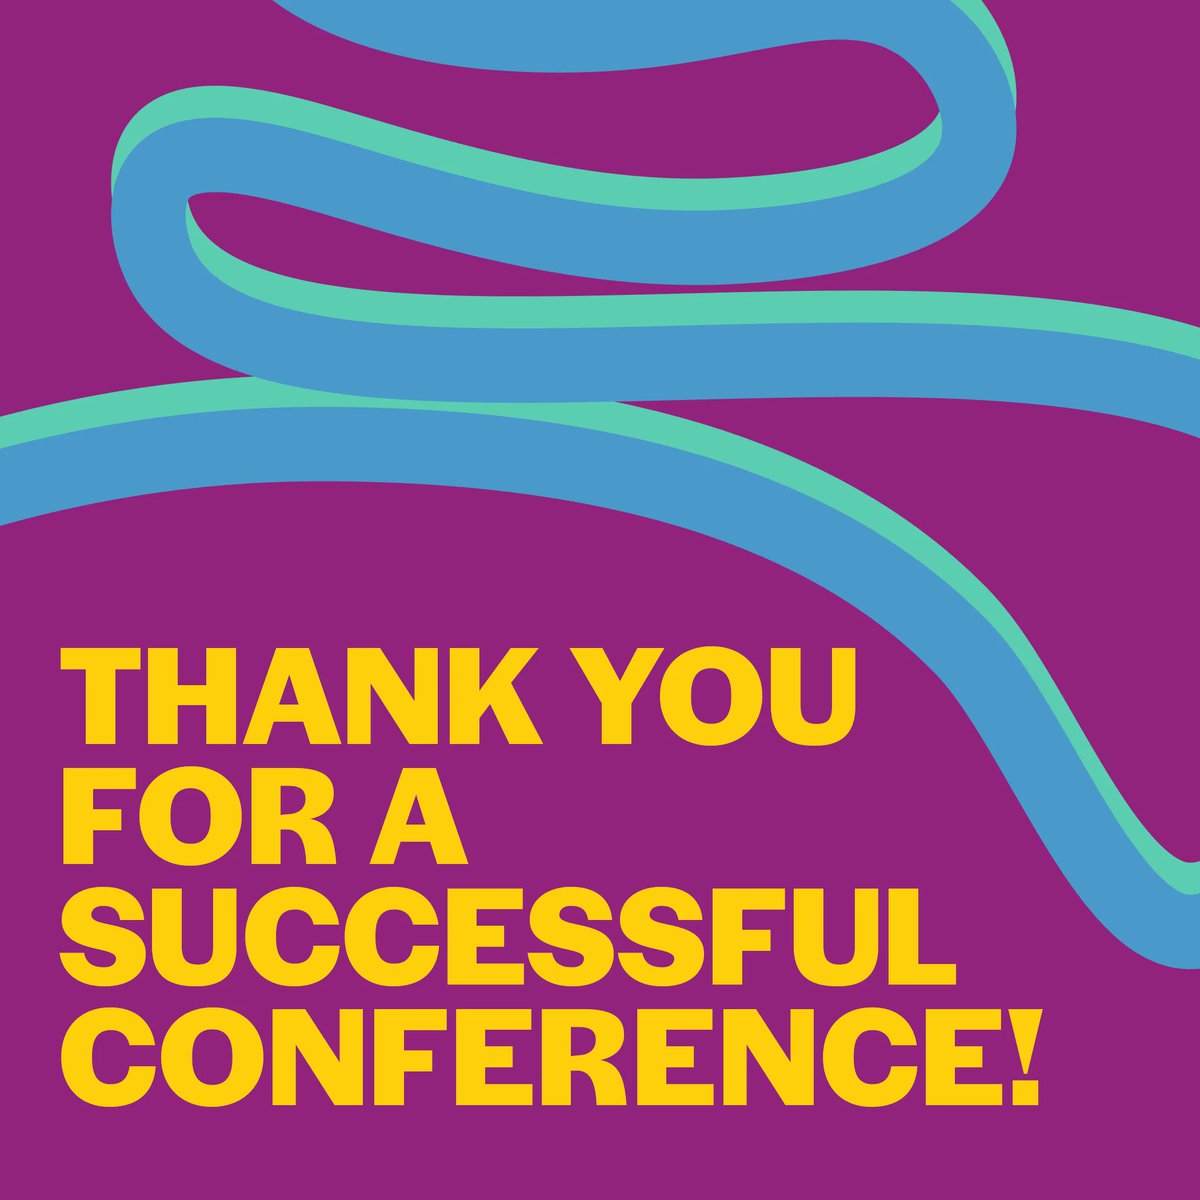 We want to extend our warmest gratitude to everyone who attended, spoke, staffed, and facilitated our conference. It was an incredible experience, and we hope you all found it informative, engaging, and rewarding. Thank you again and see you at the next one! #22CI #22CI2023